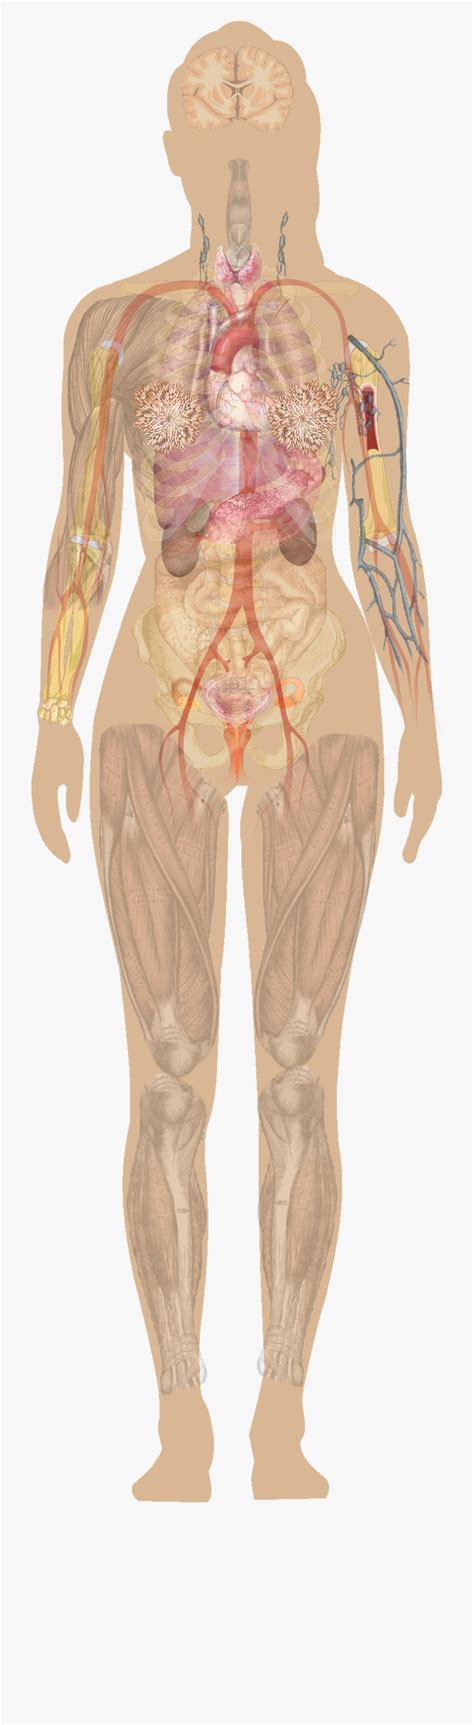 Abdominal Anatomy Male Human Body Diagram Without Labels